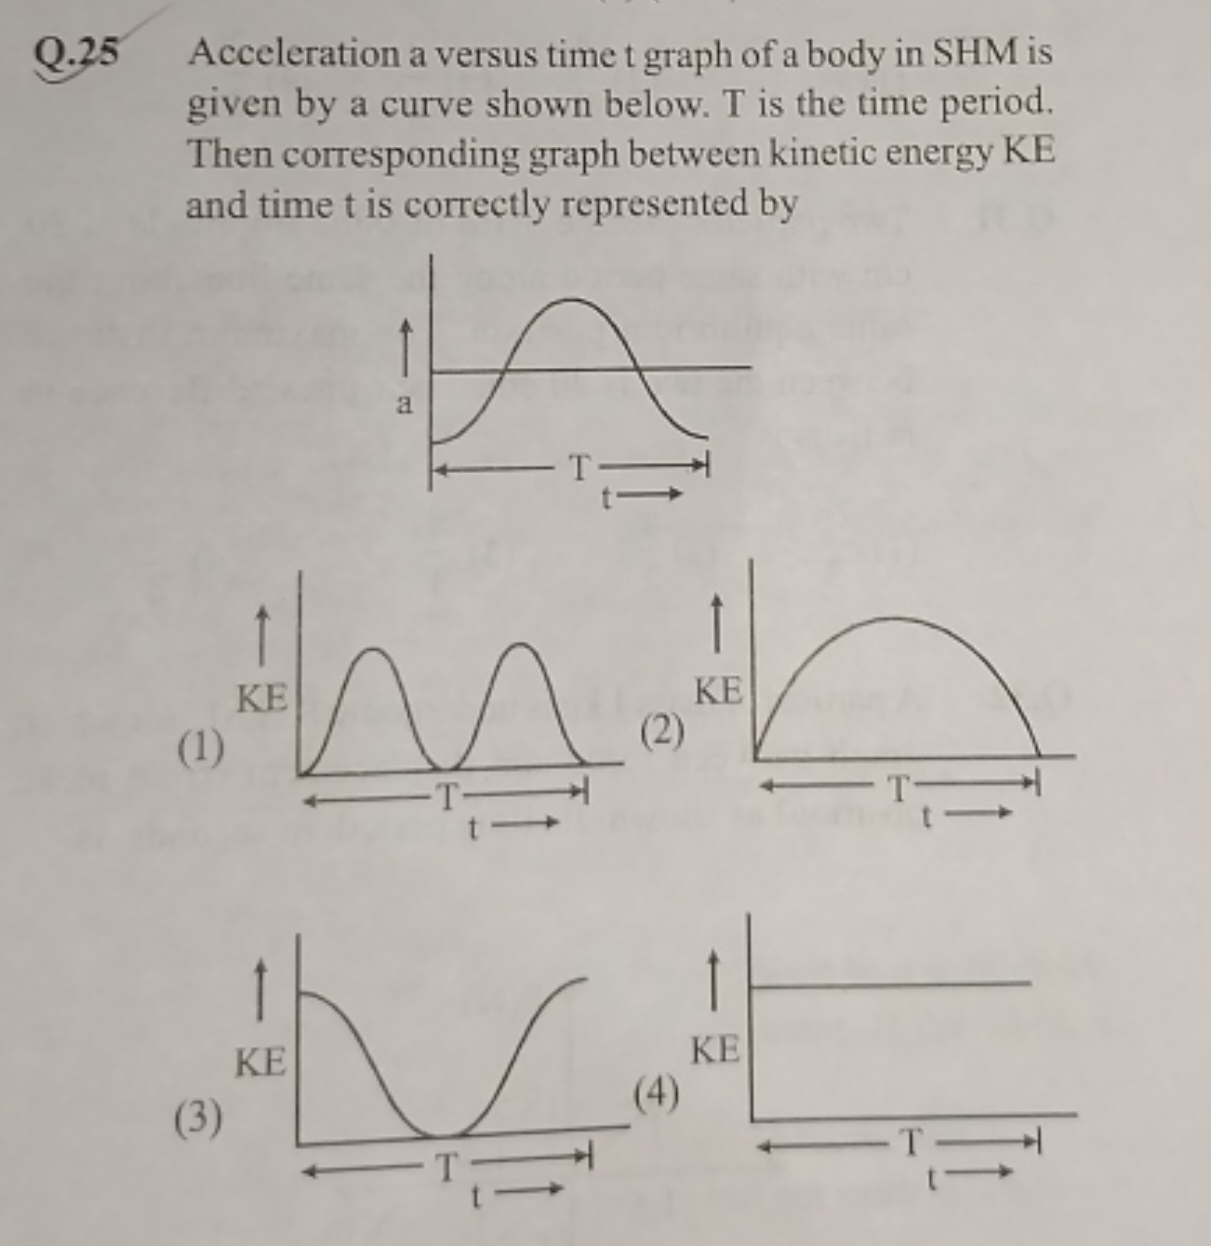 25 Acceleration a versus time t graph of a body in SHM is given by a c